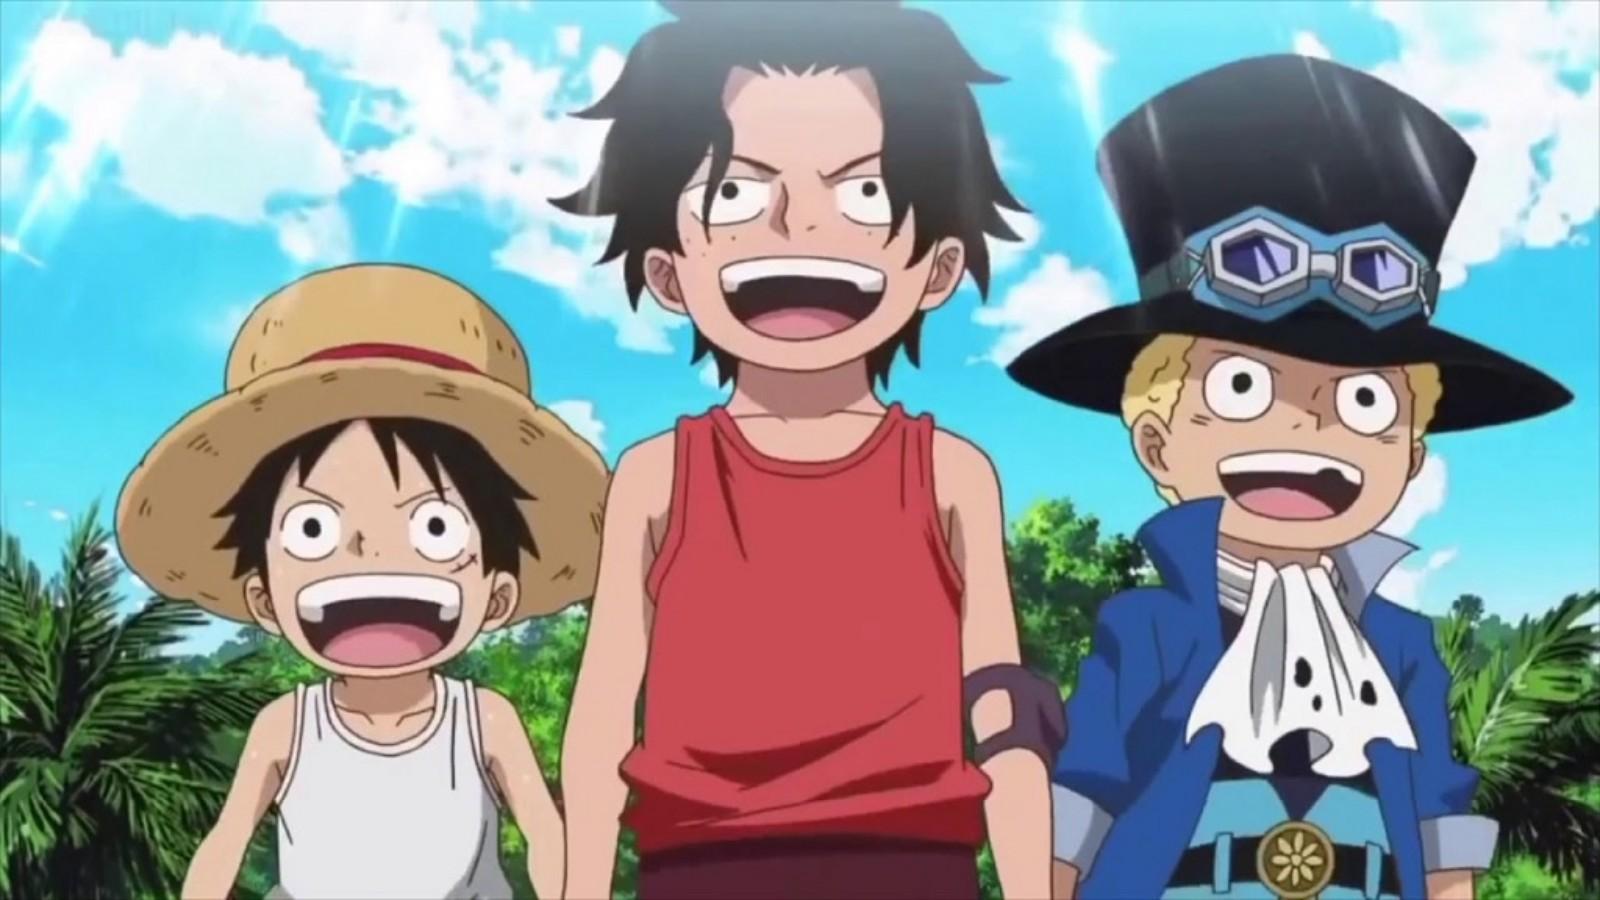 Luffy, Ace, and Sabo as children